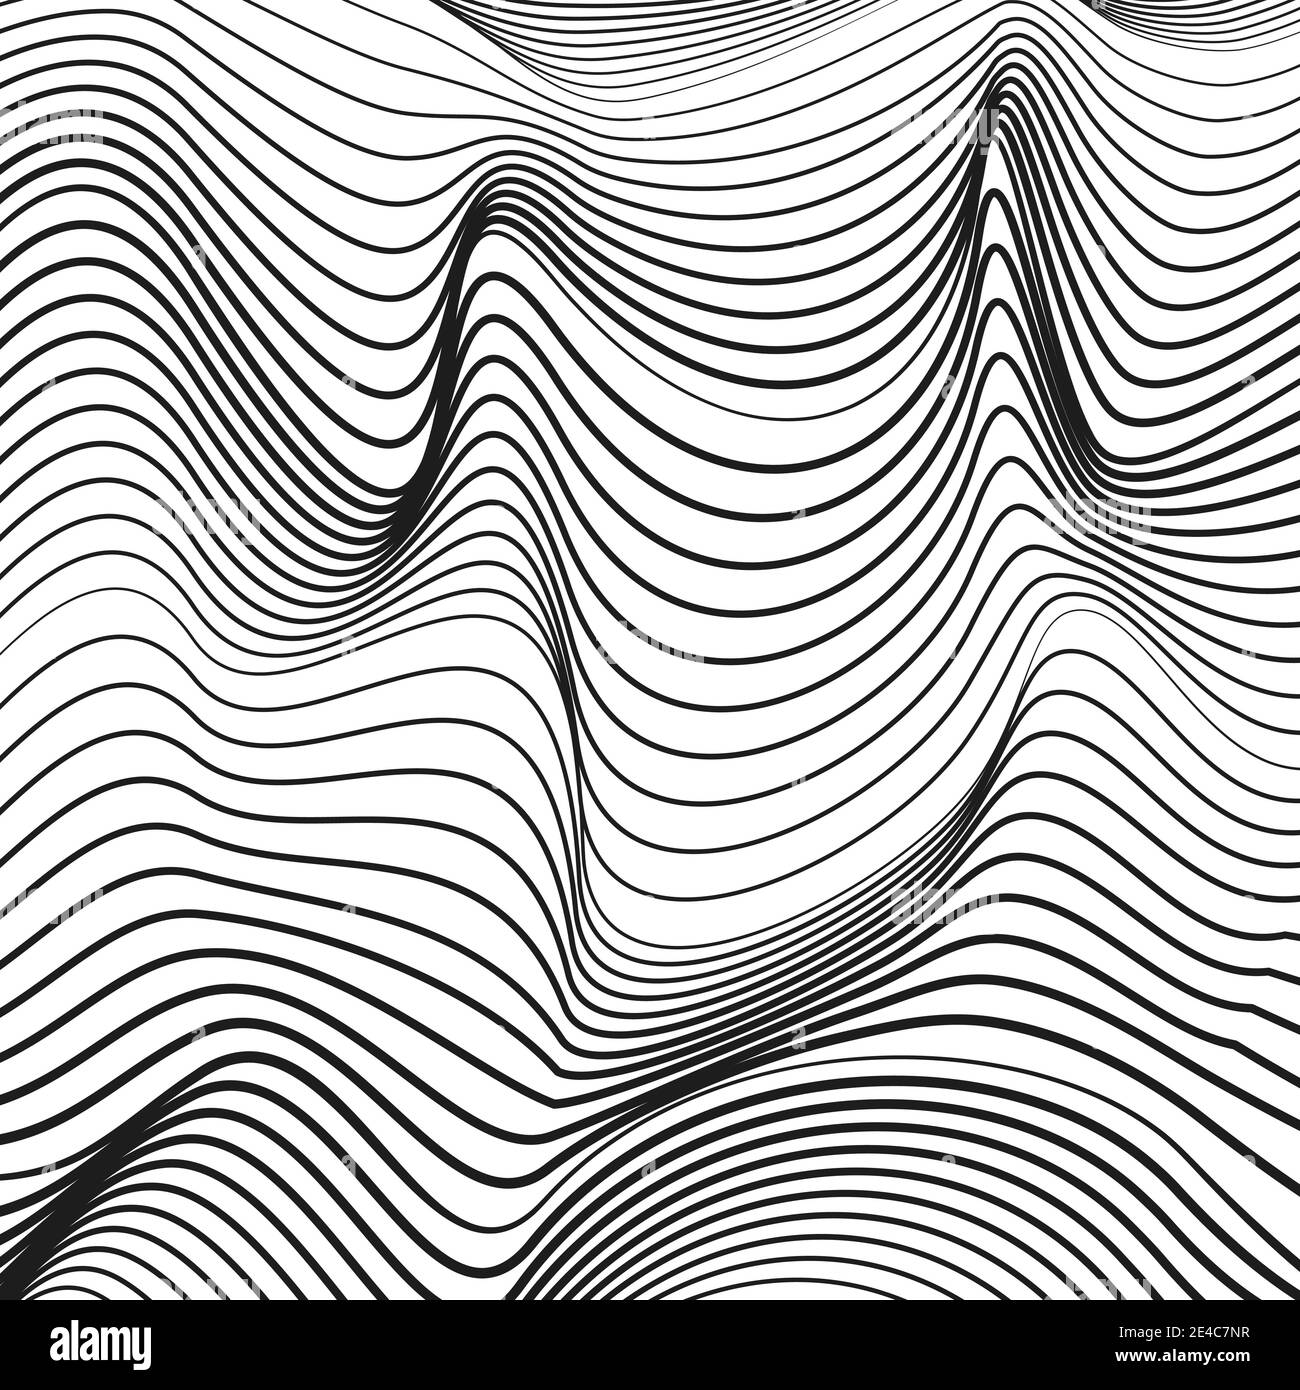 Techno waves. Black and white striped pattern. Line art design. Vector squiggle thin curves. Abstract monochrome background. Modern graphic. EPS10 Stock Vector